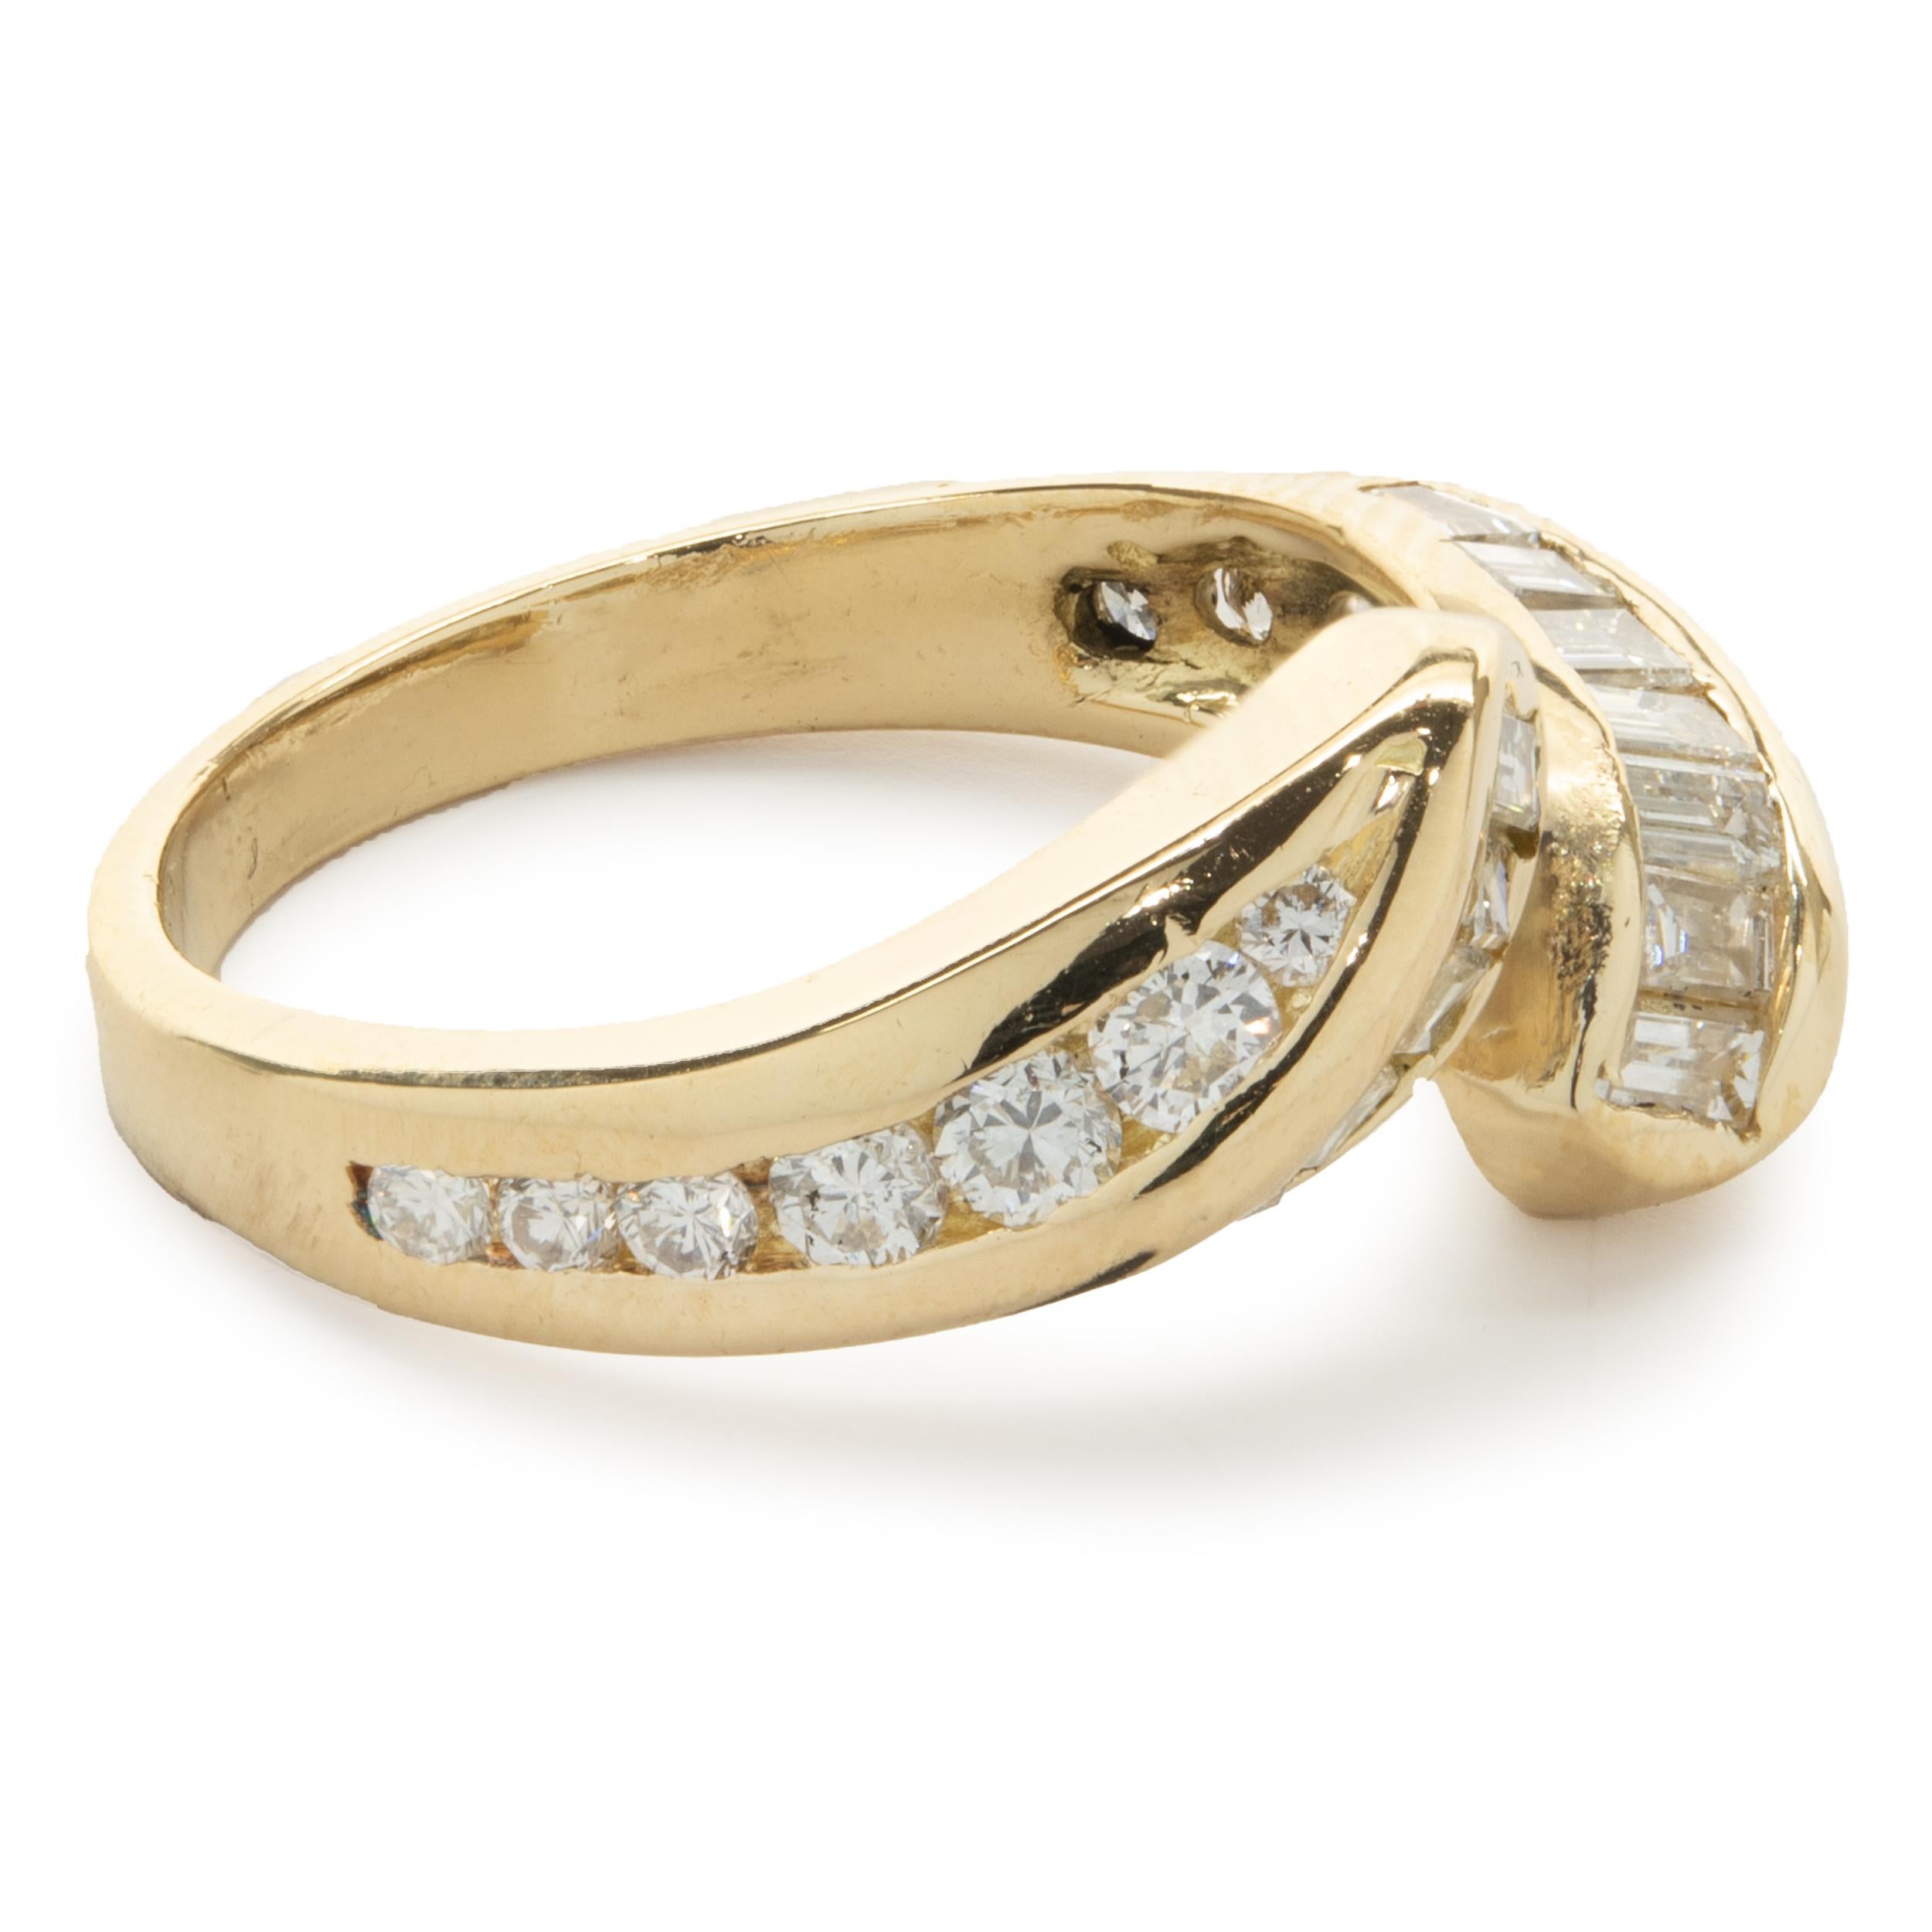 Designer: custom
Material: 18K yellow gold
Diamond: 14 round brilliant and 14 baguette cut = 1.00cttw
Color: H
Clarity: SI1
Ring size: 5.5 (please allow two additional shipping days for sizing requests)
Weight:  5.02 grams
